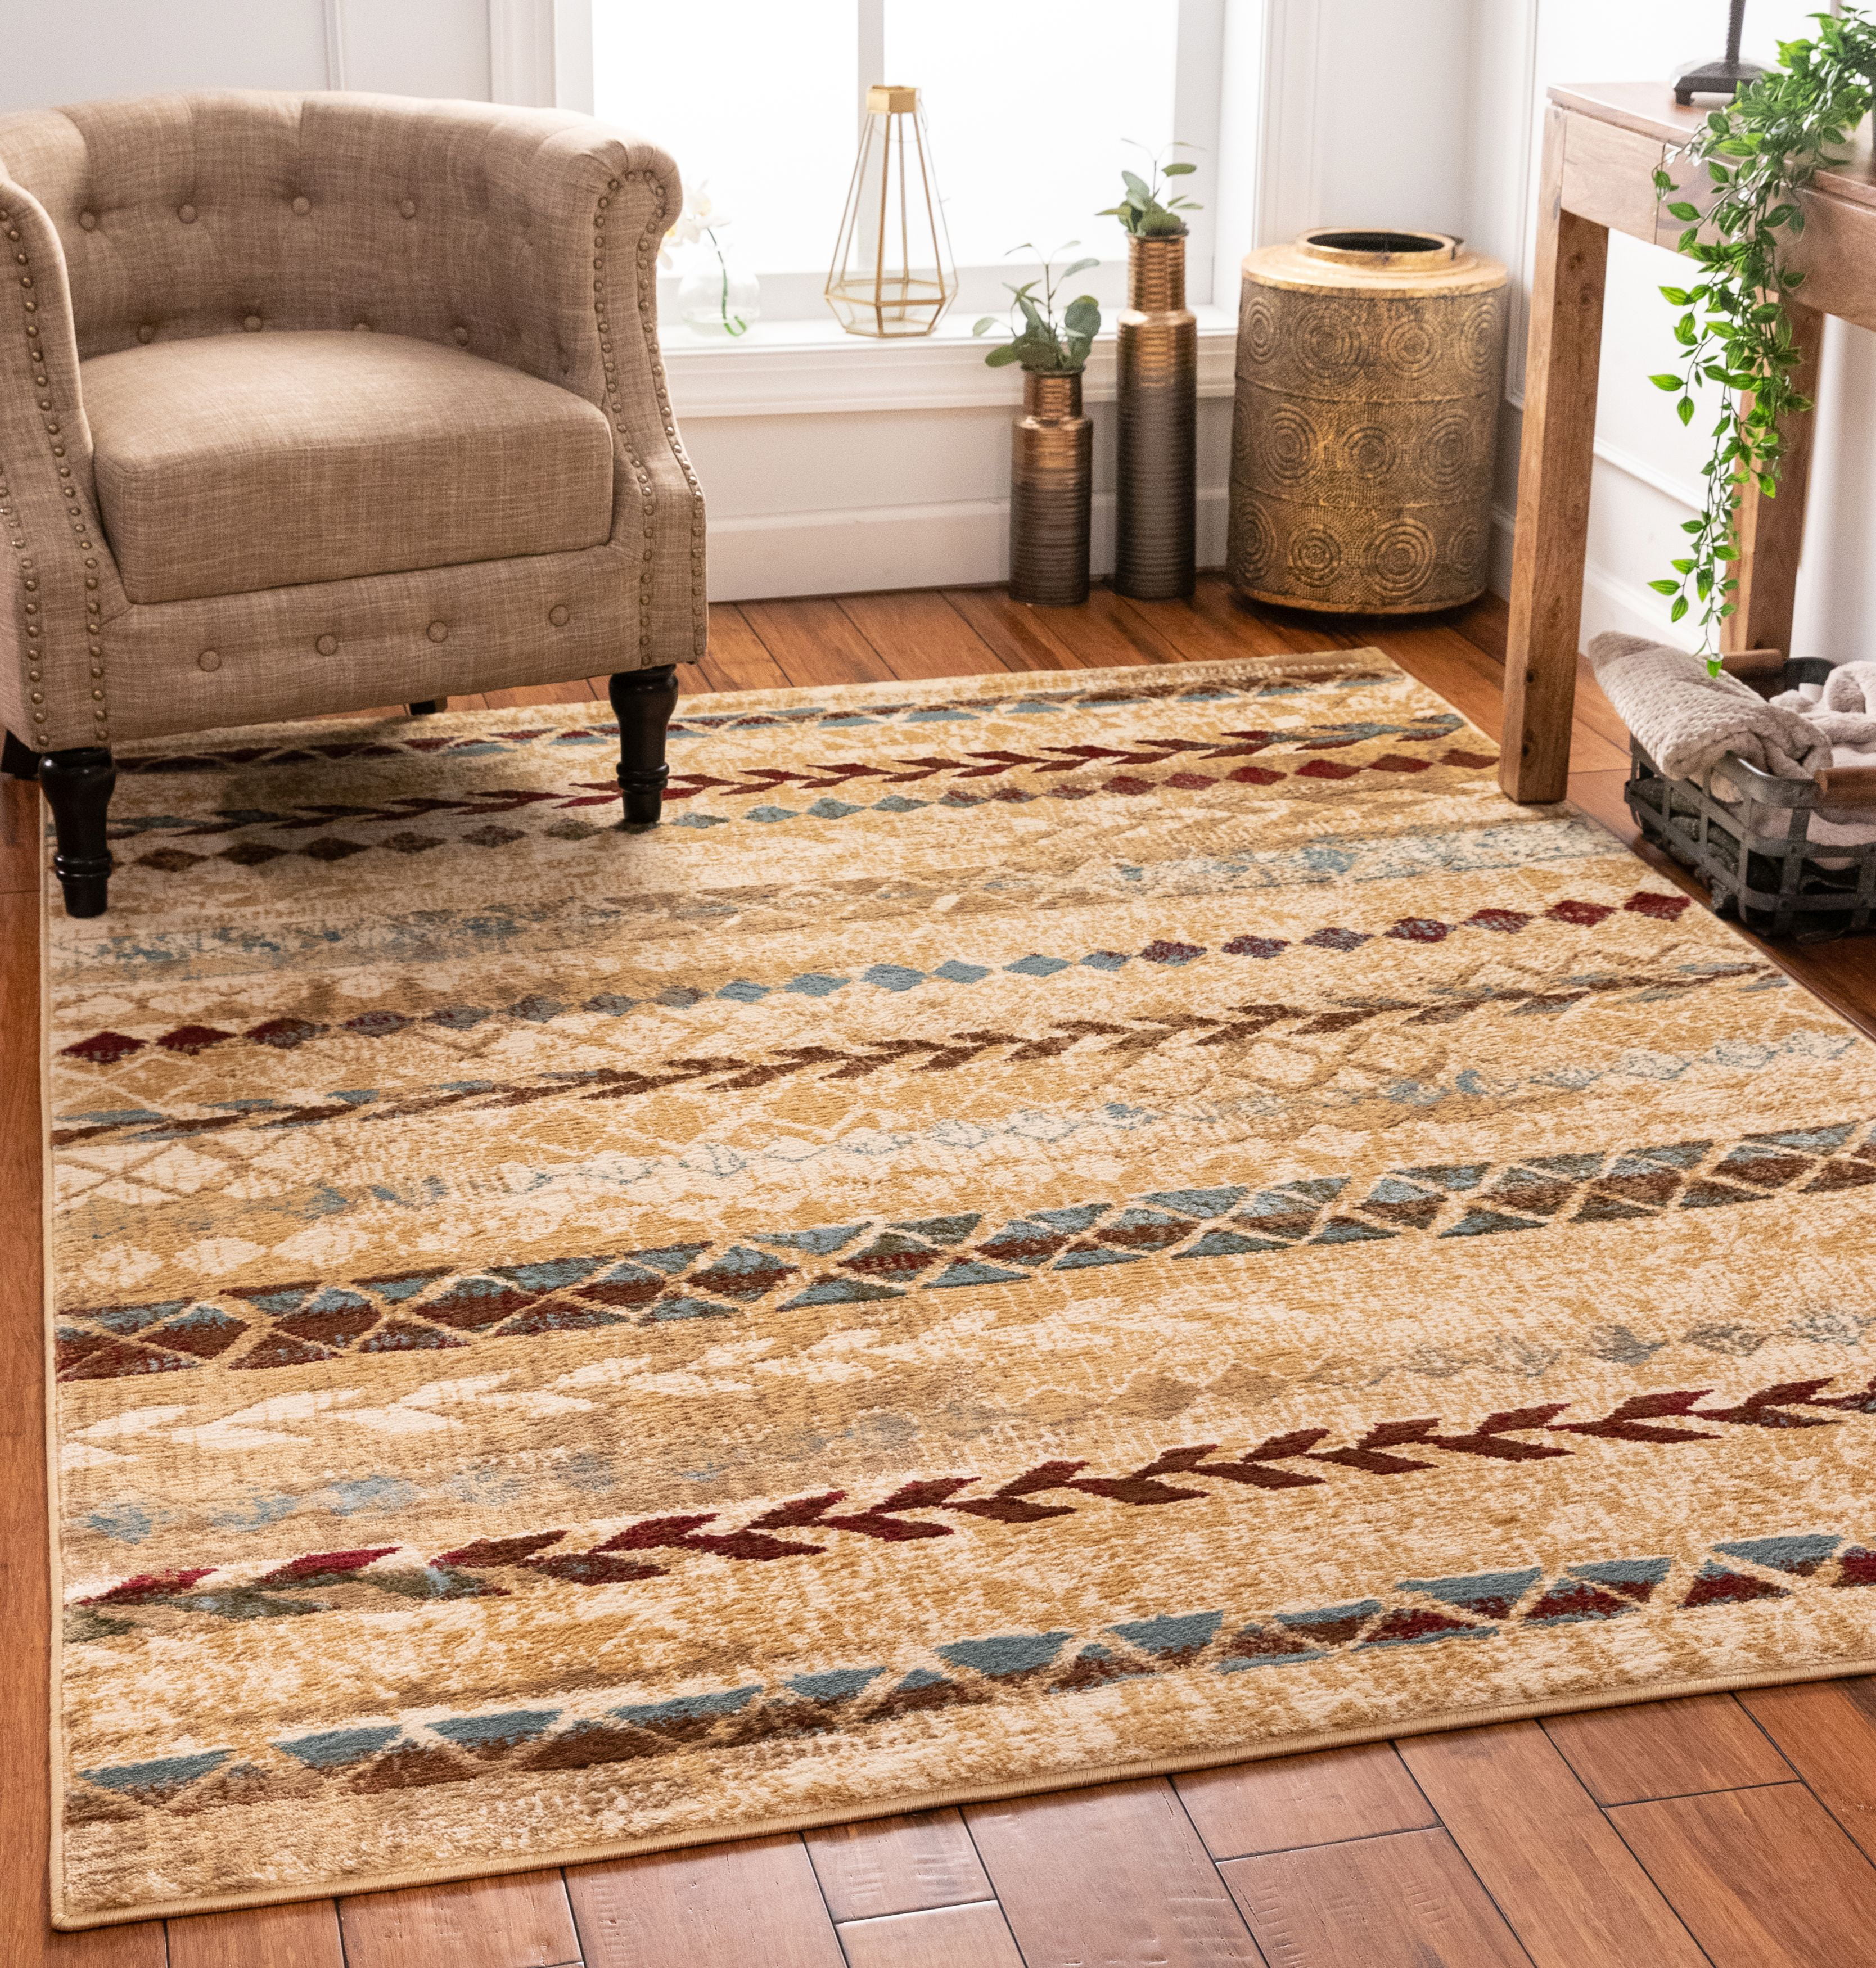 Well Woven Moroccan Stripes Area Rug Ivory Multicolor - Walmart.com ...